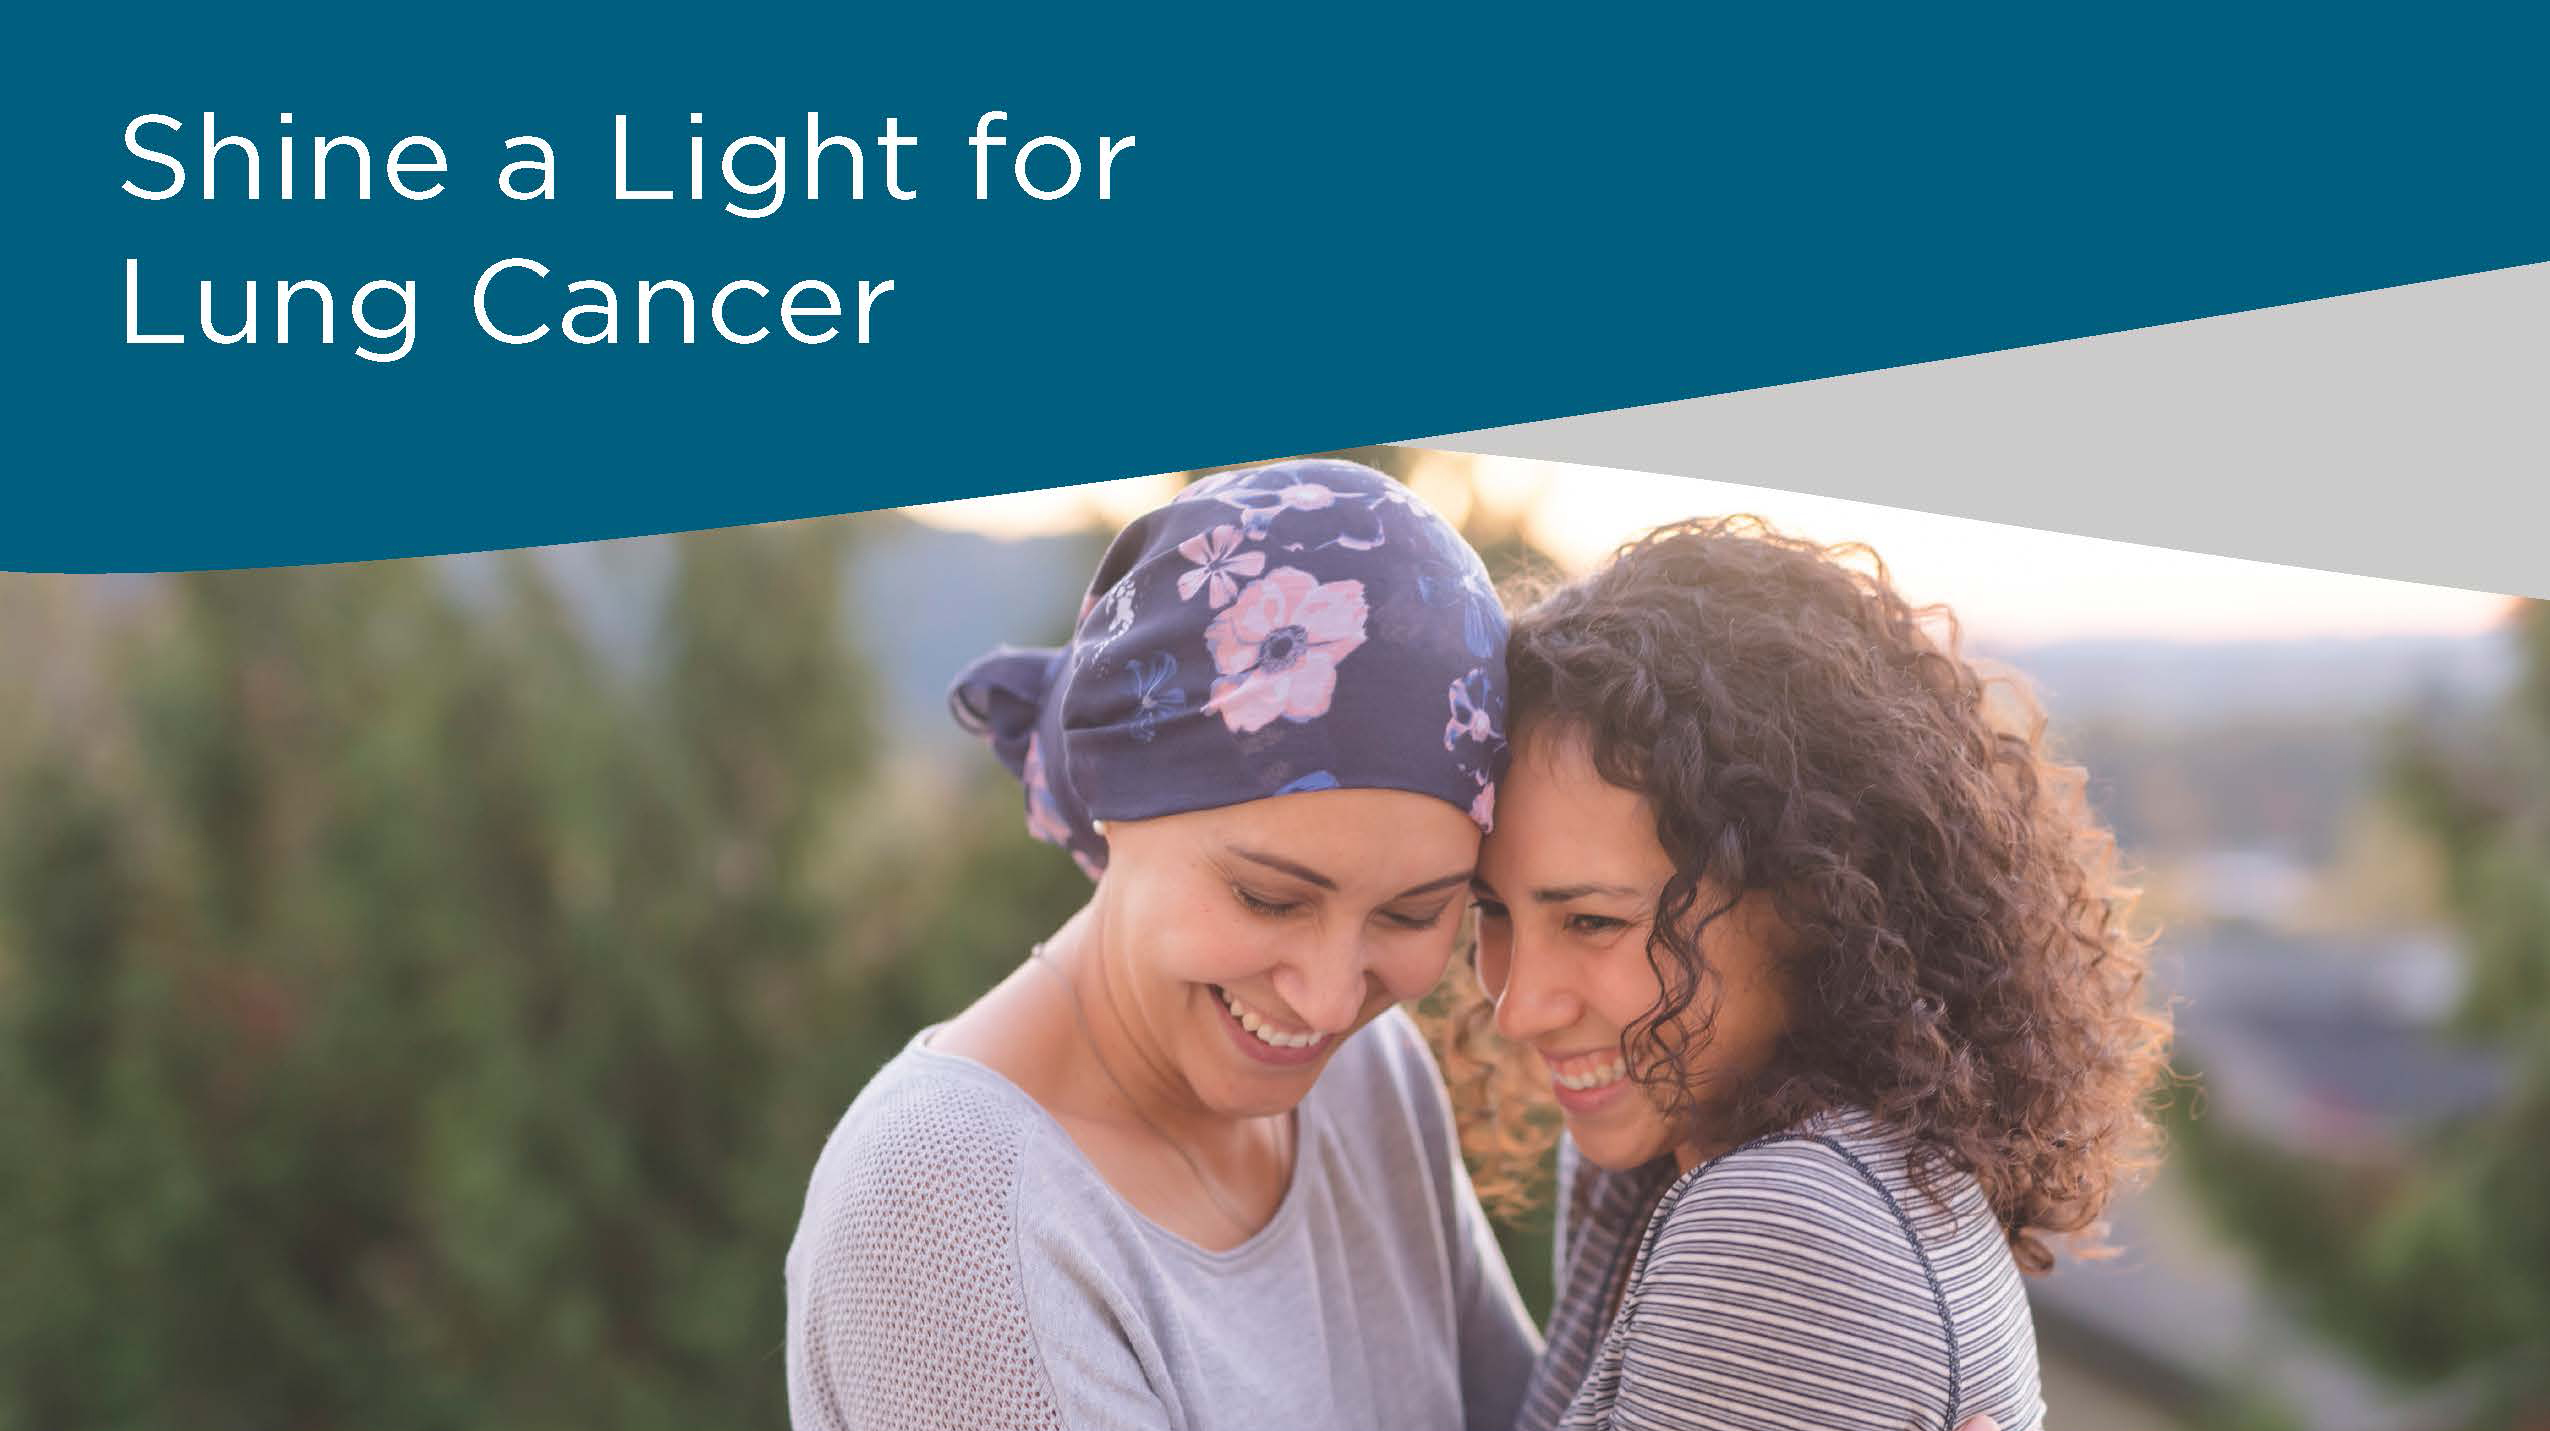 Shine a light for lung cancer